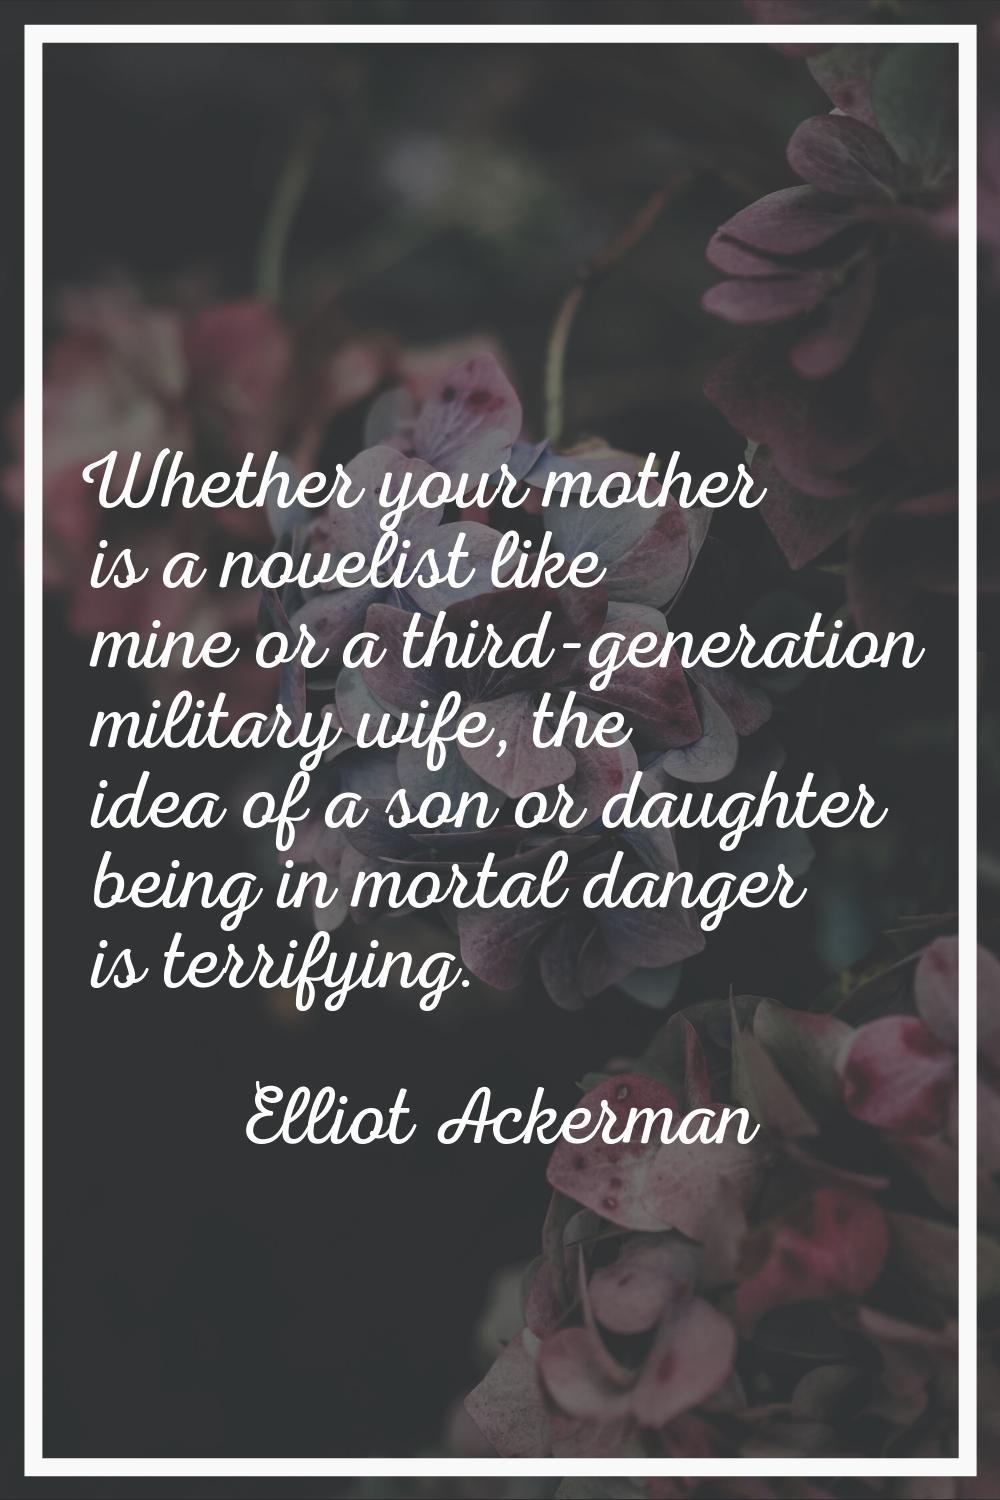 Whether your mother is a novelist like mine or a third-generation military wife, the idea of a son 